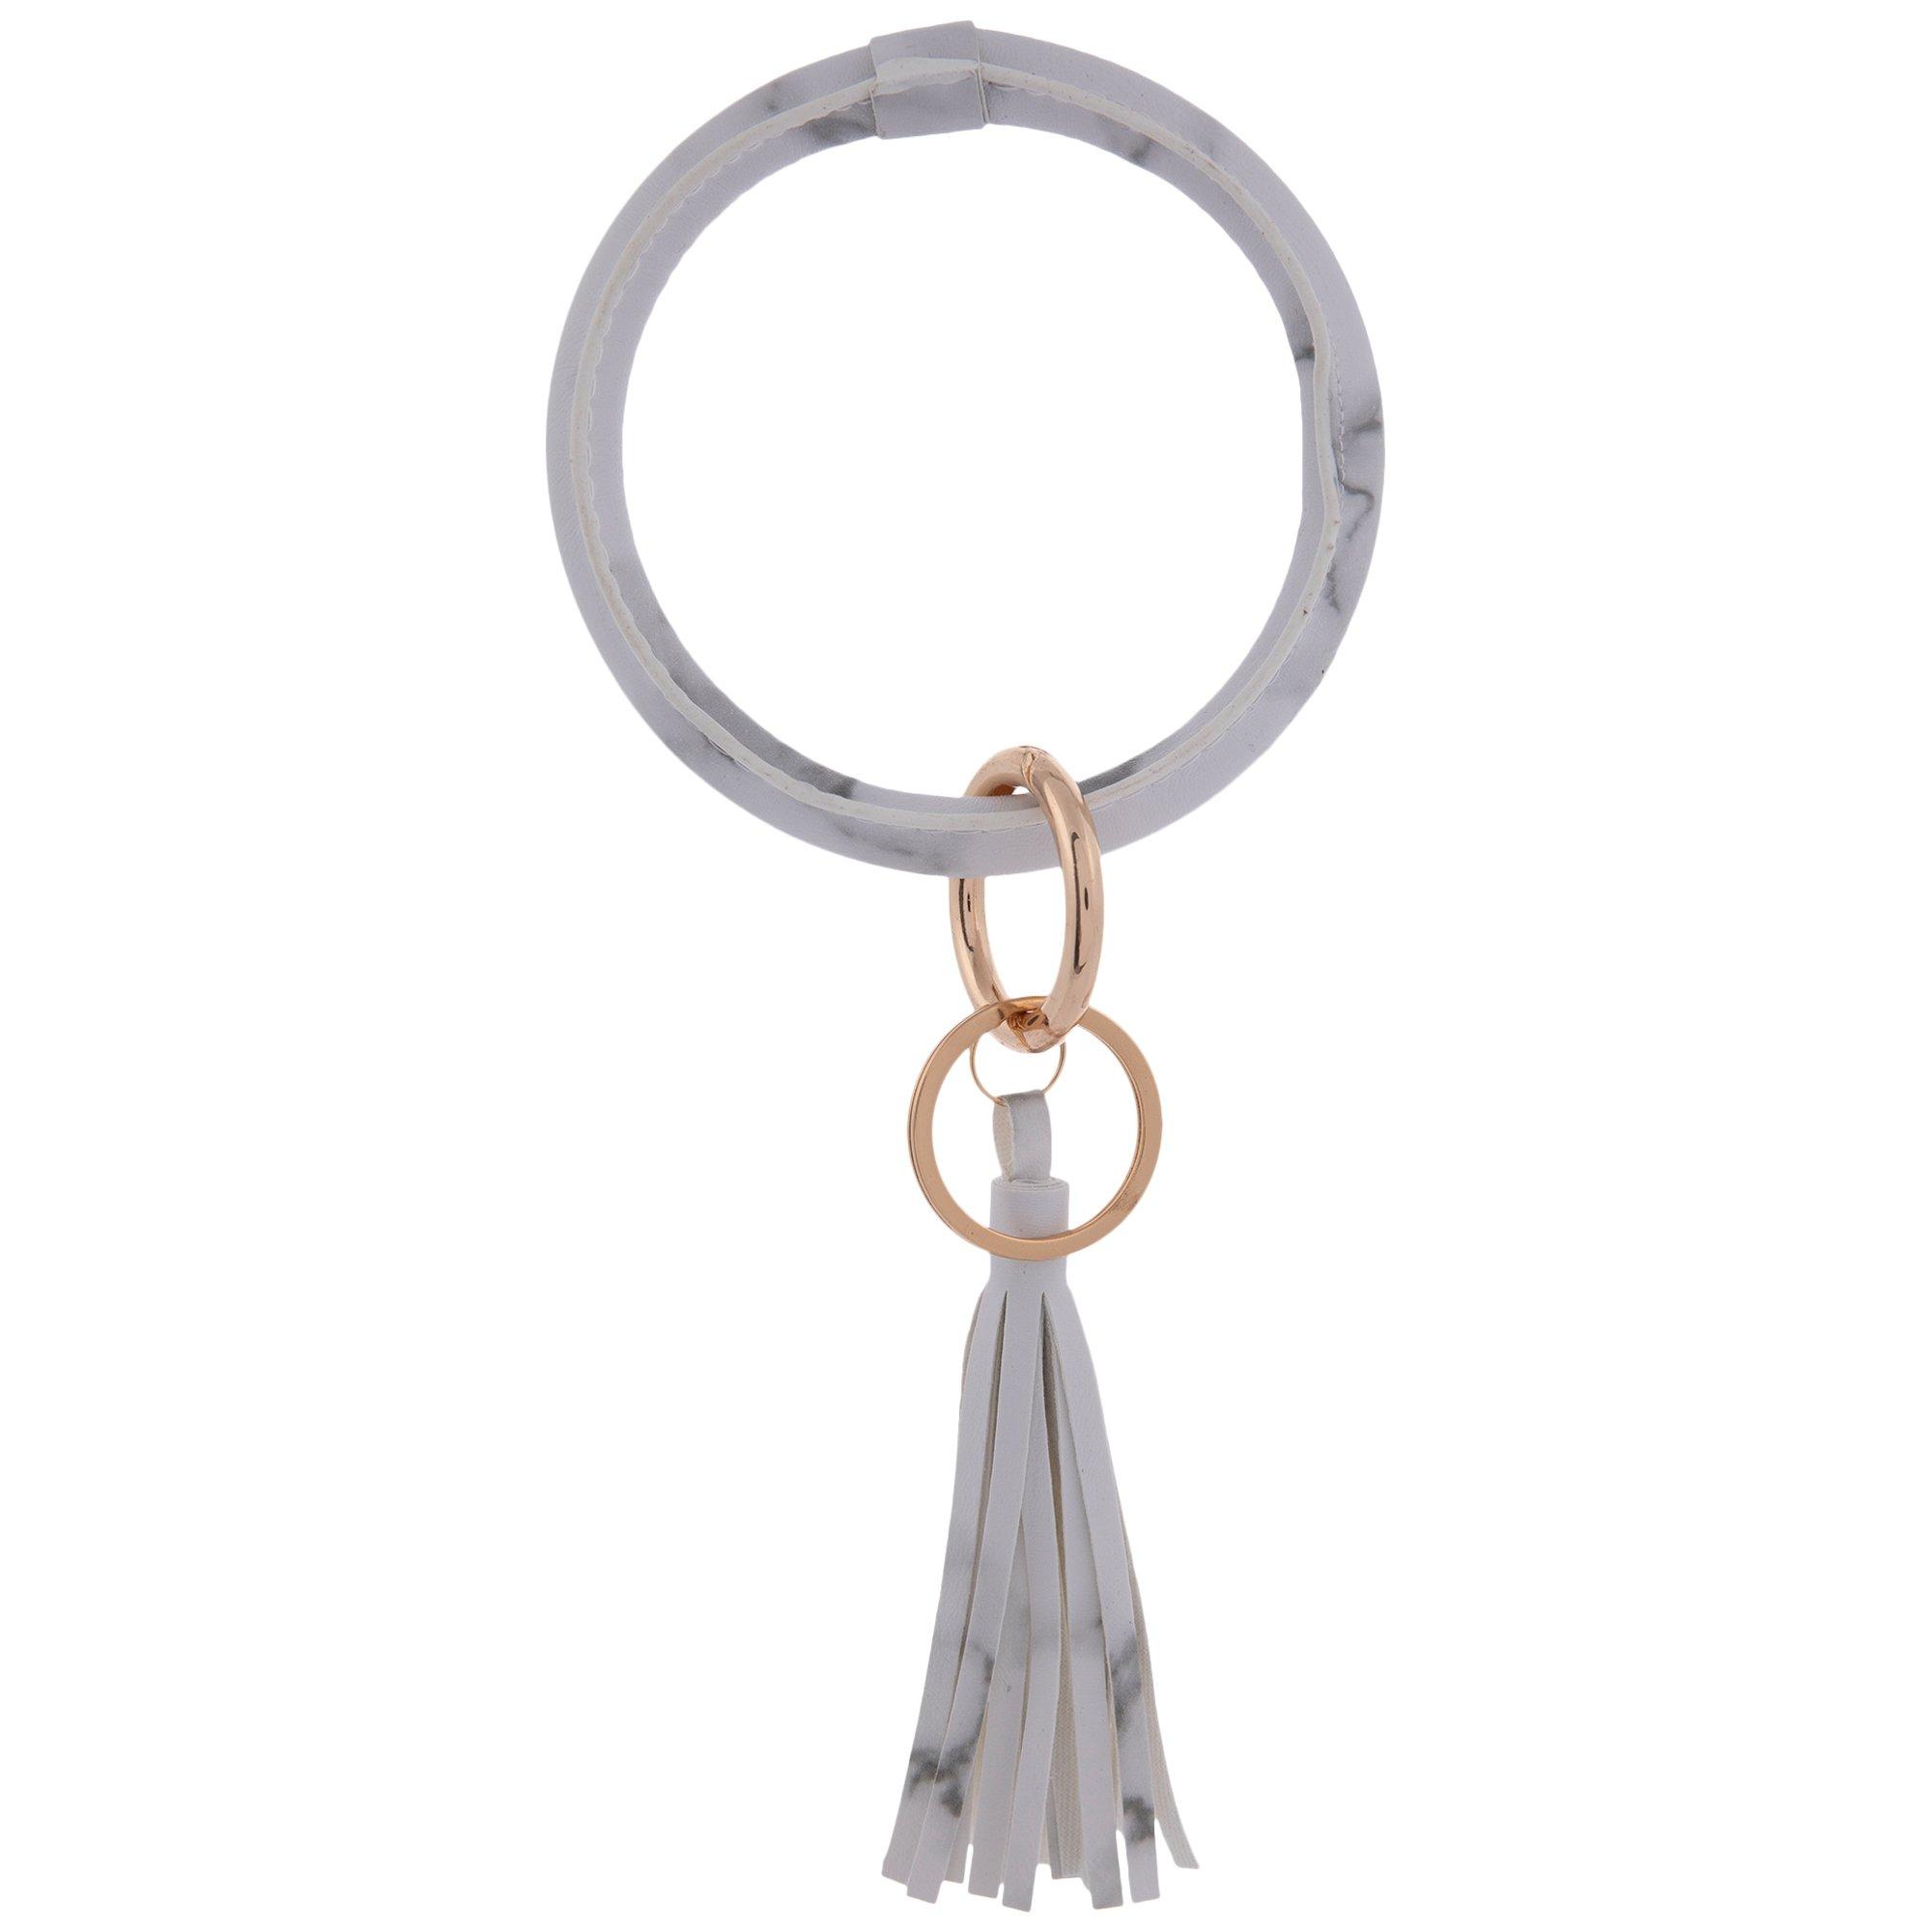 Leather Tassel Keychain Kit with Swivel Hooks and Key Rings (25 Colors, 150  Pieces)